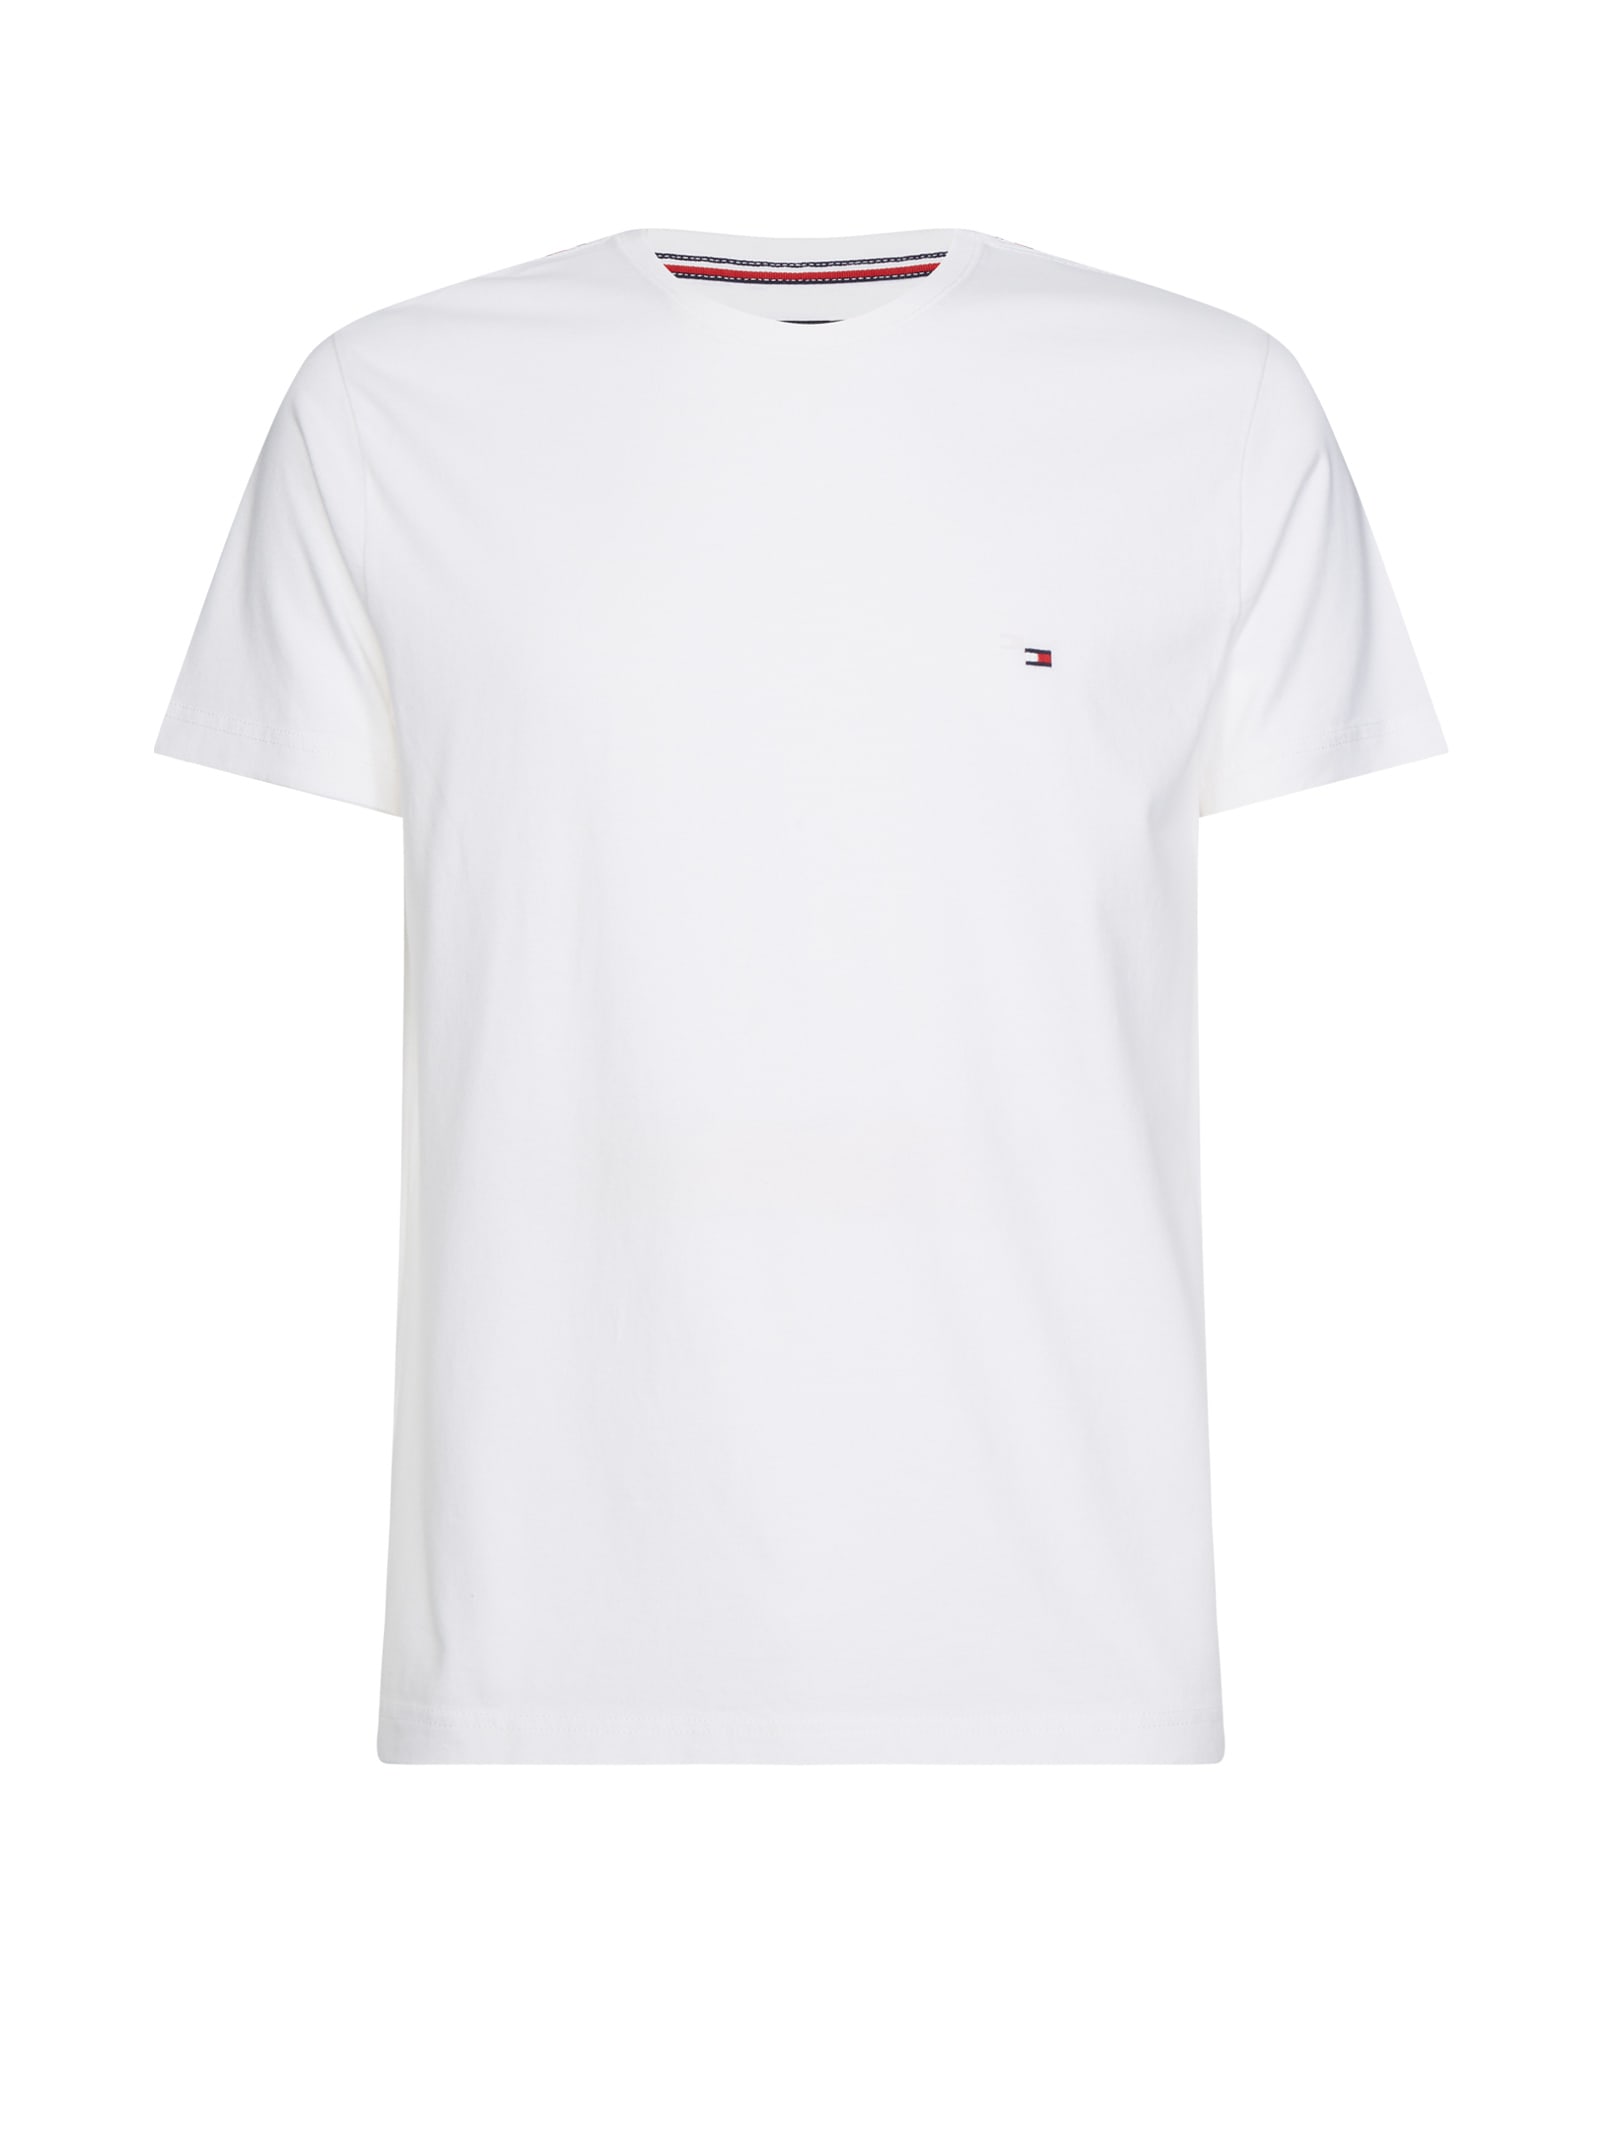 Tommy Hilfiger White T-shirt With Flag